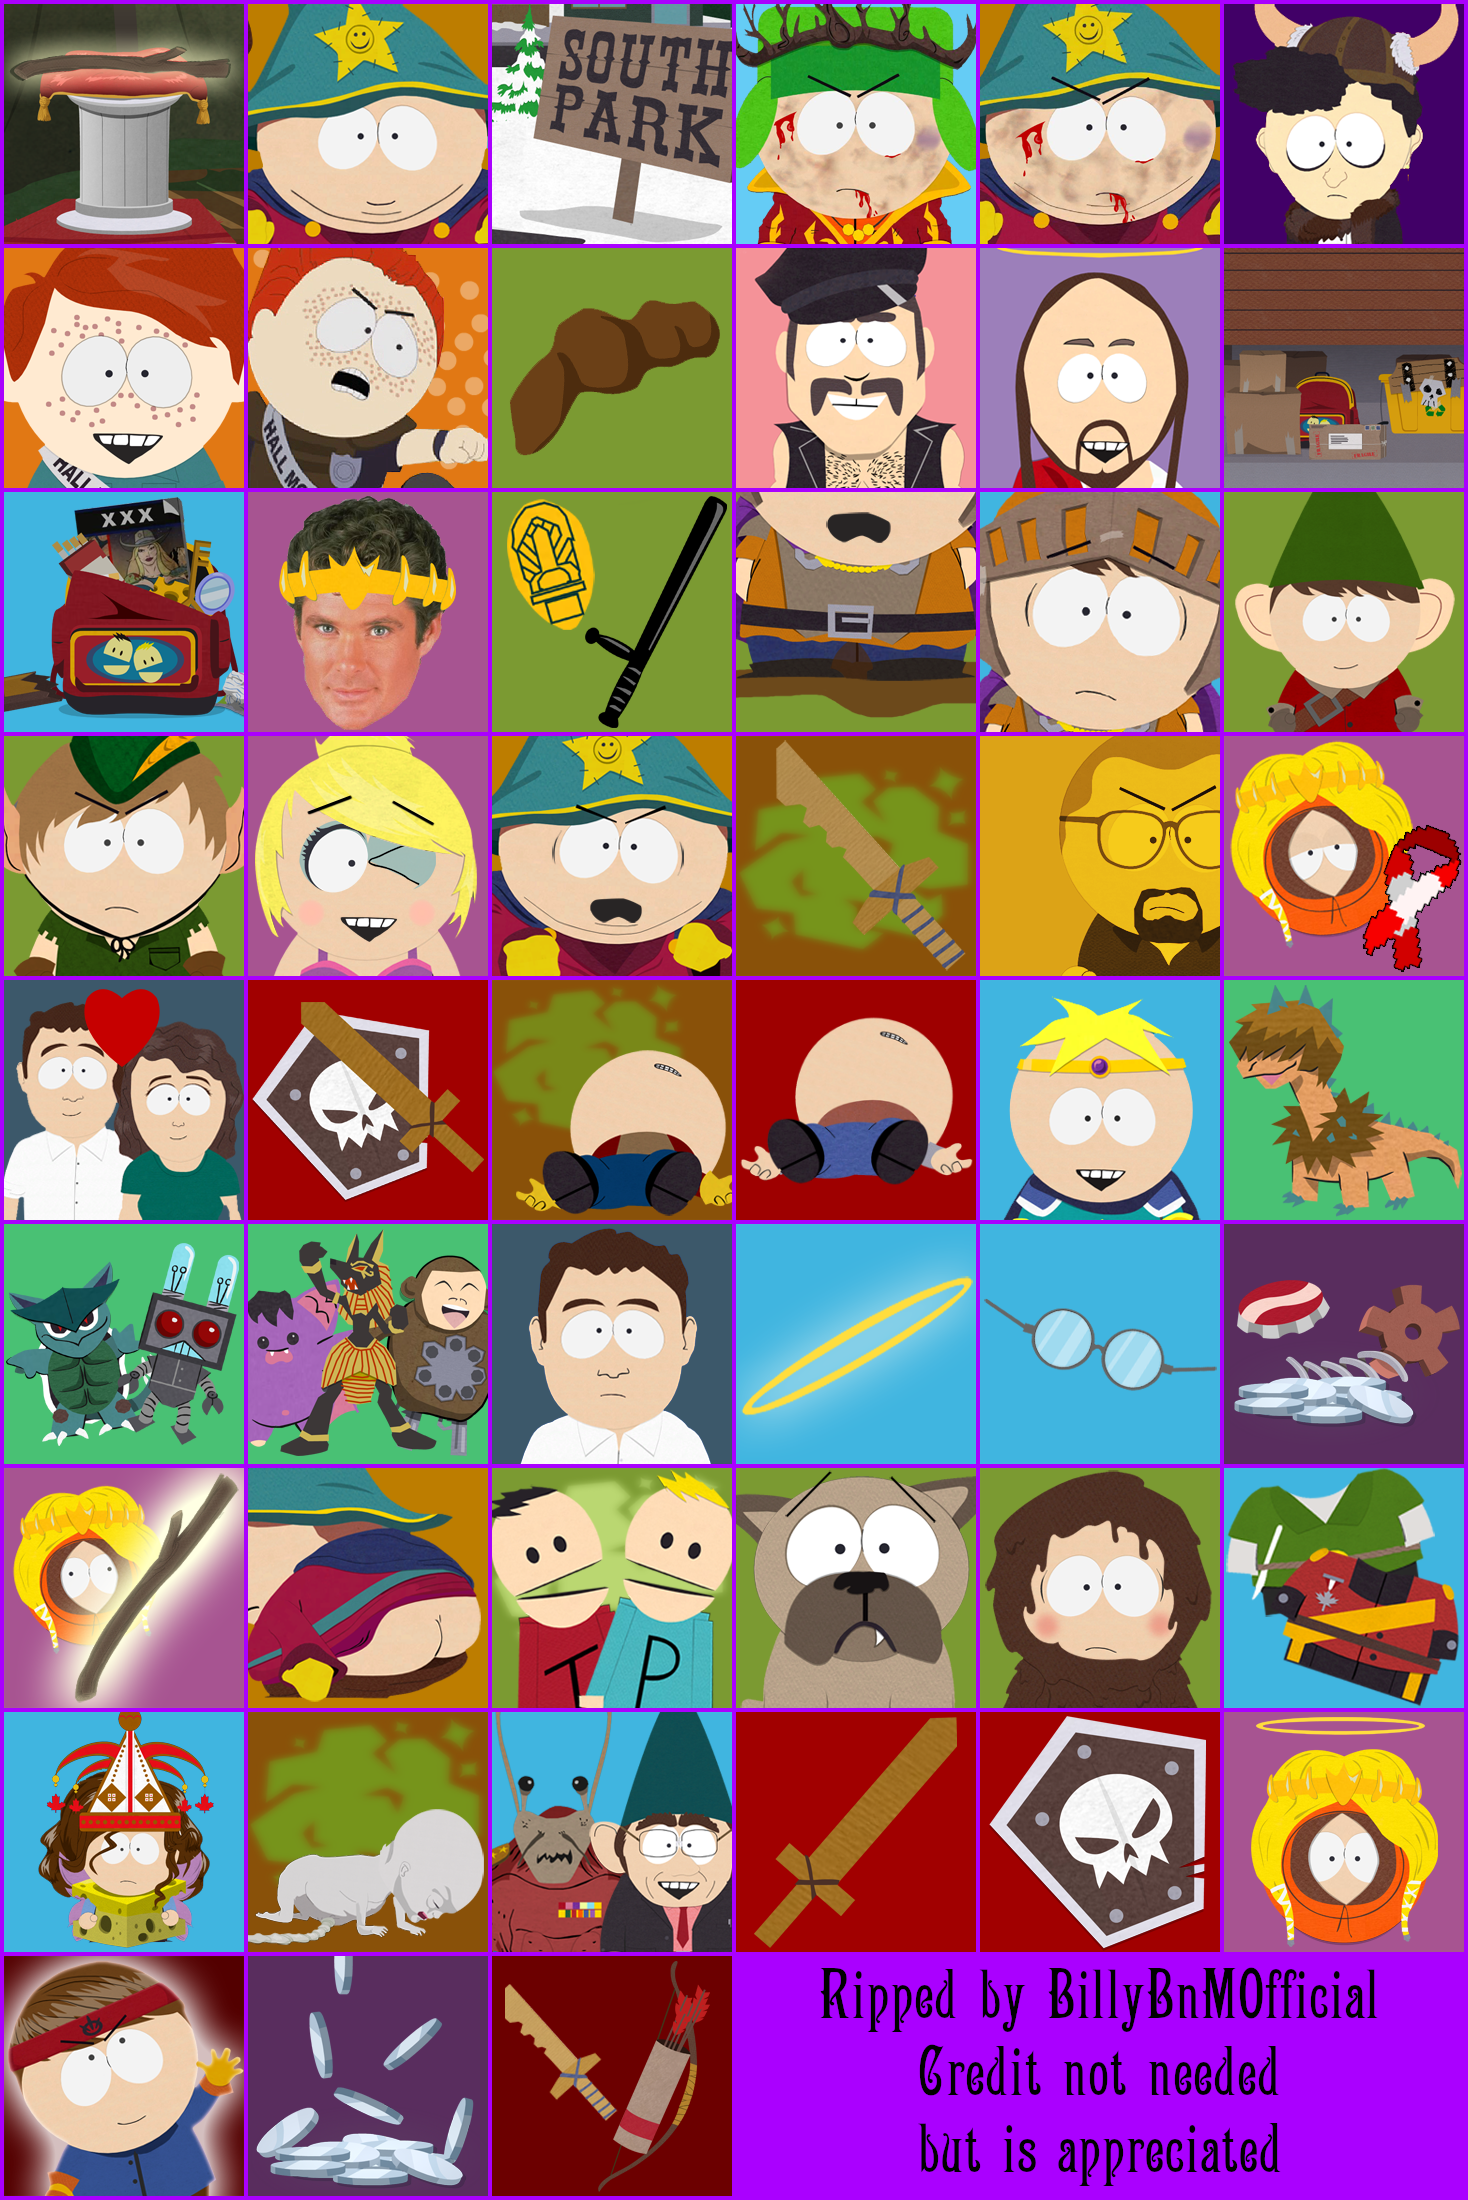 South Park: The Stick of Truth - Trophy Icons